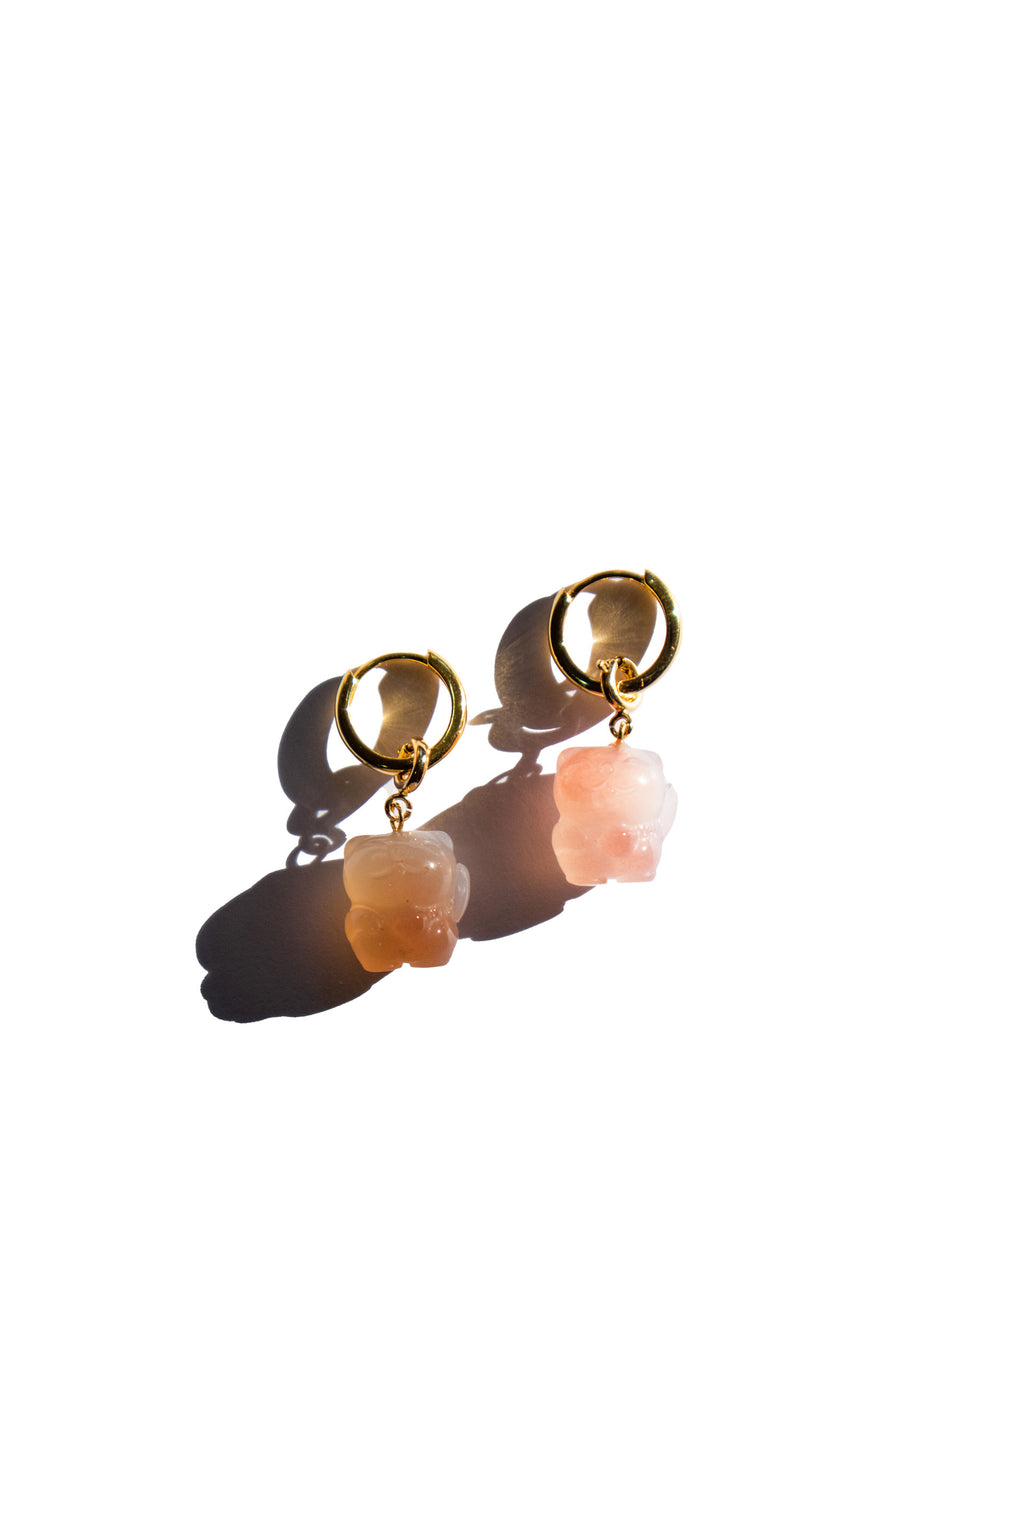 seree-kitty-red-nature-agate-charm-earrings